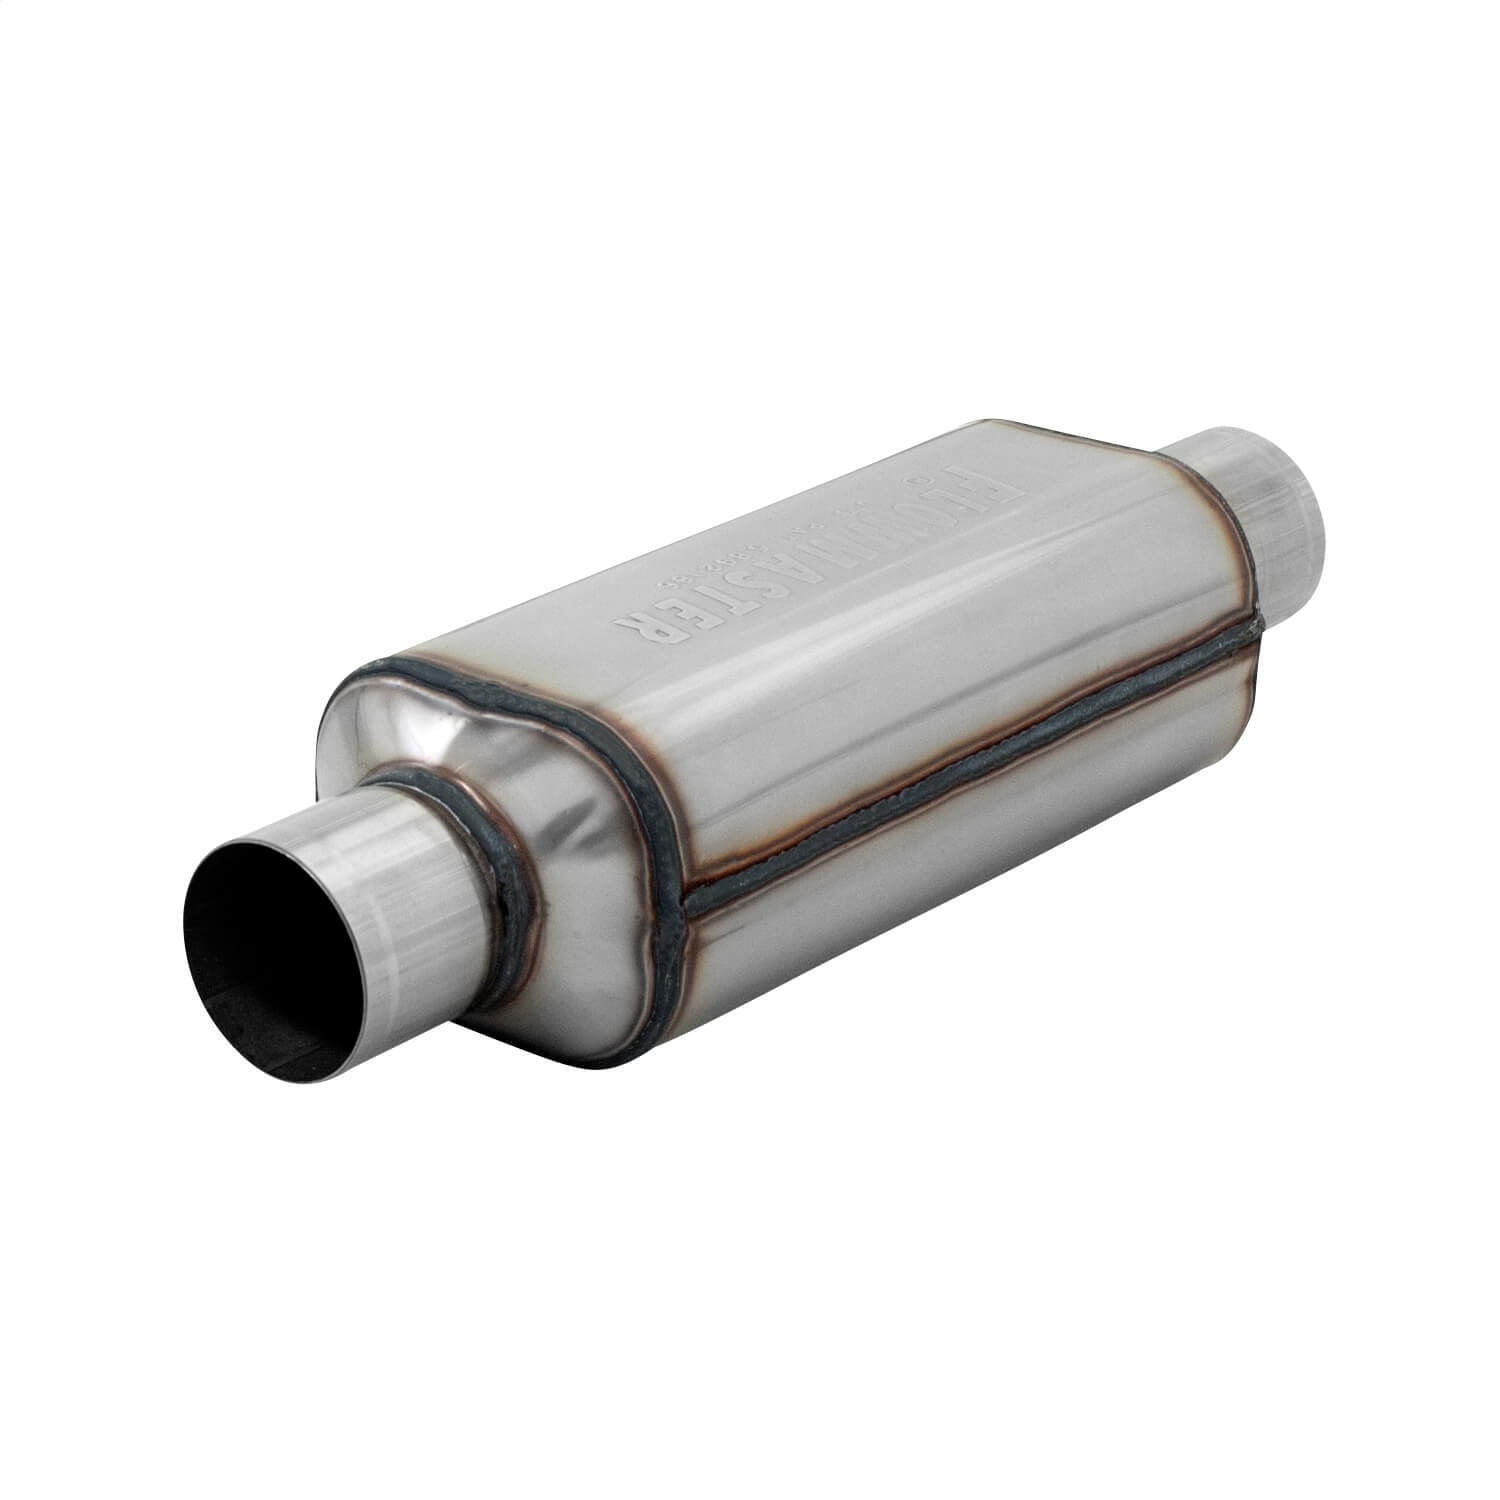 OUTLAW STAINLESS STEEL 3" FLOWMASTER STYLE CHAMBERED MUFFLER OFFSET/CENTRE